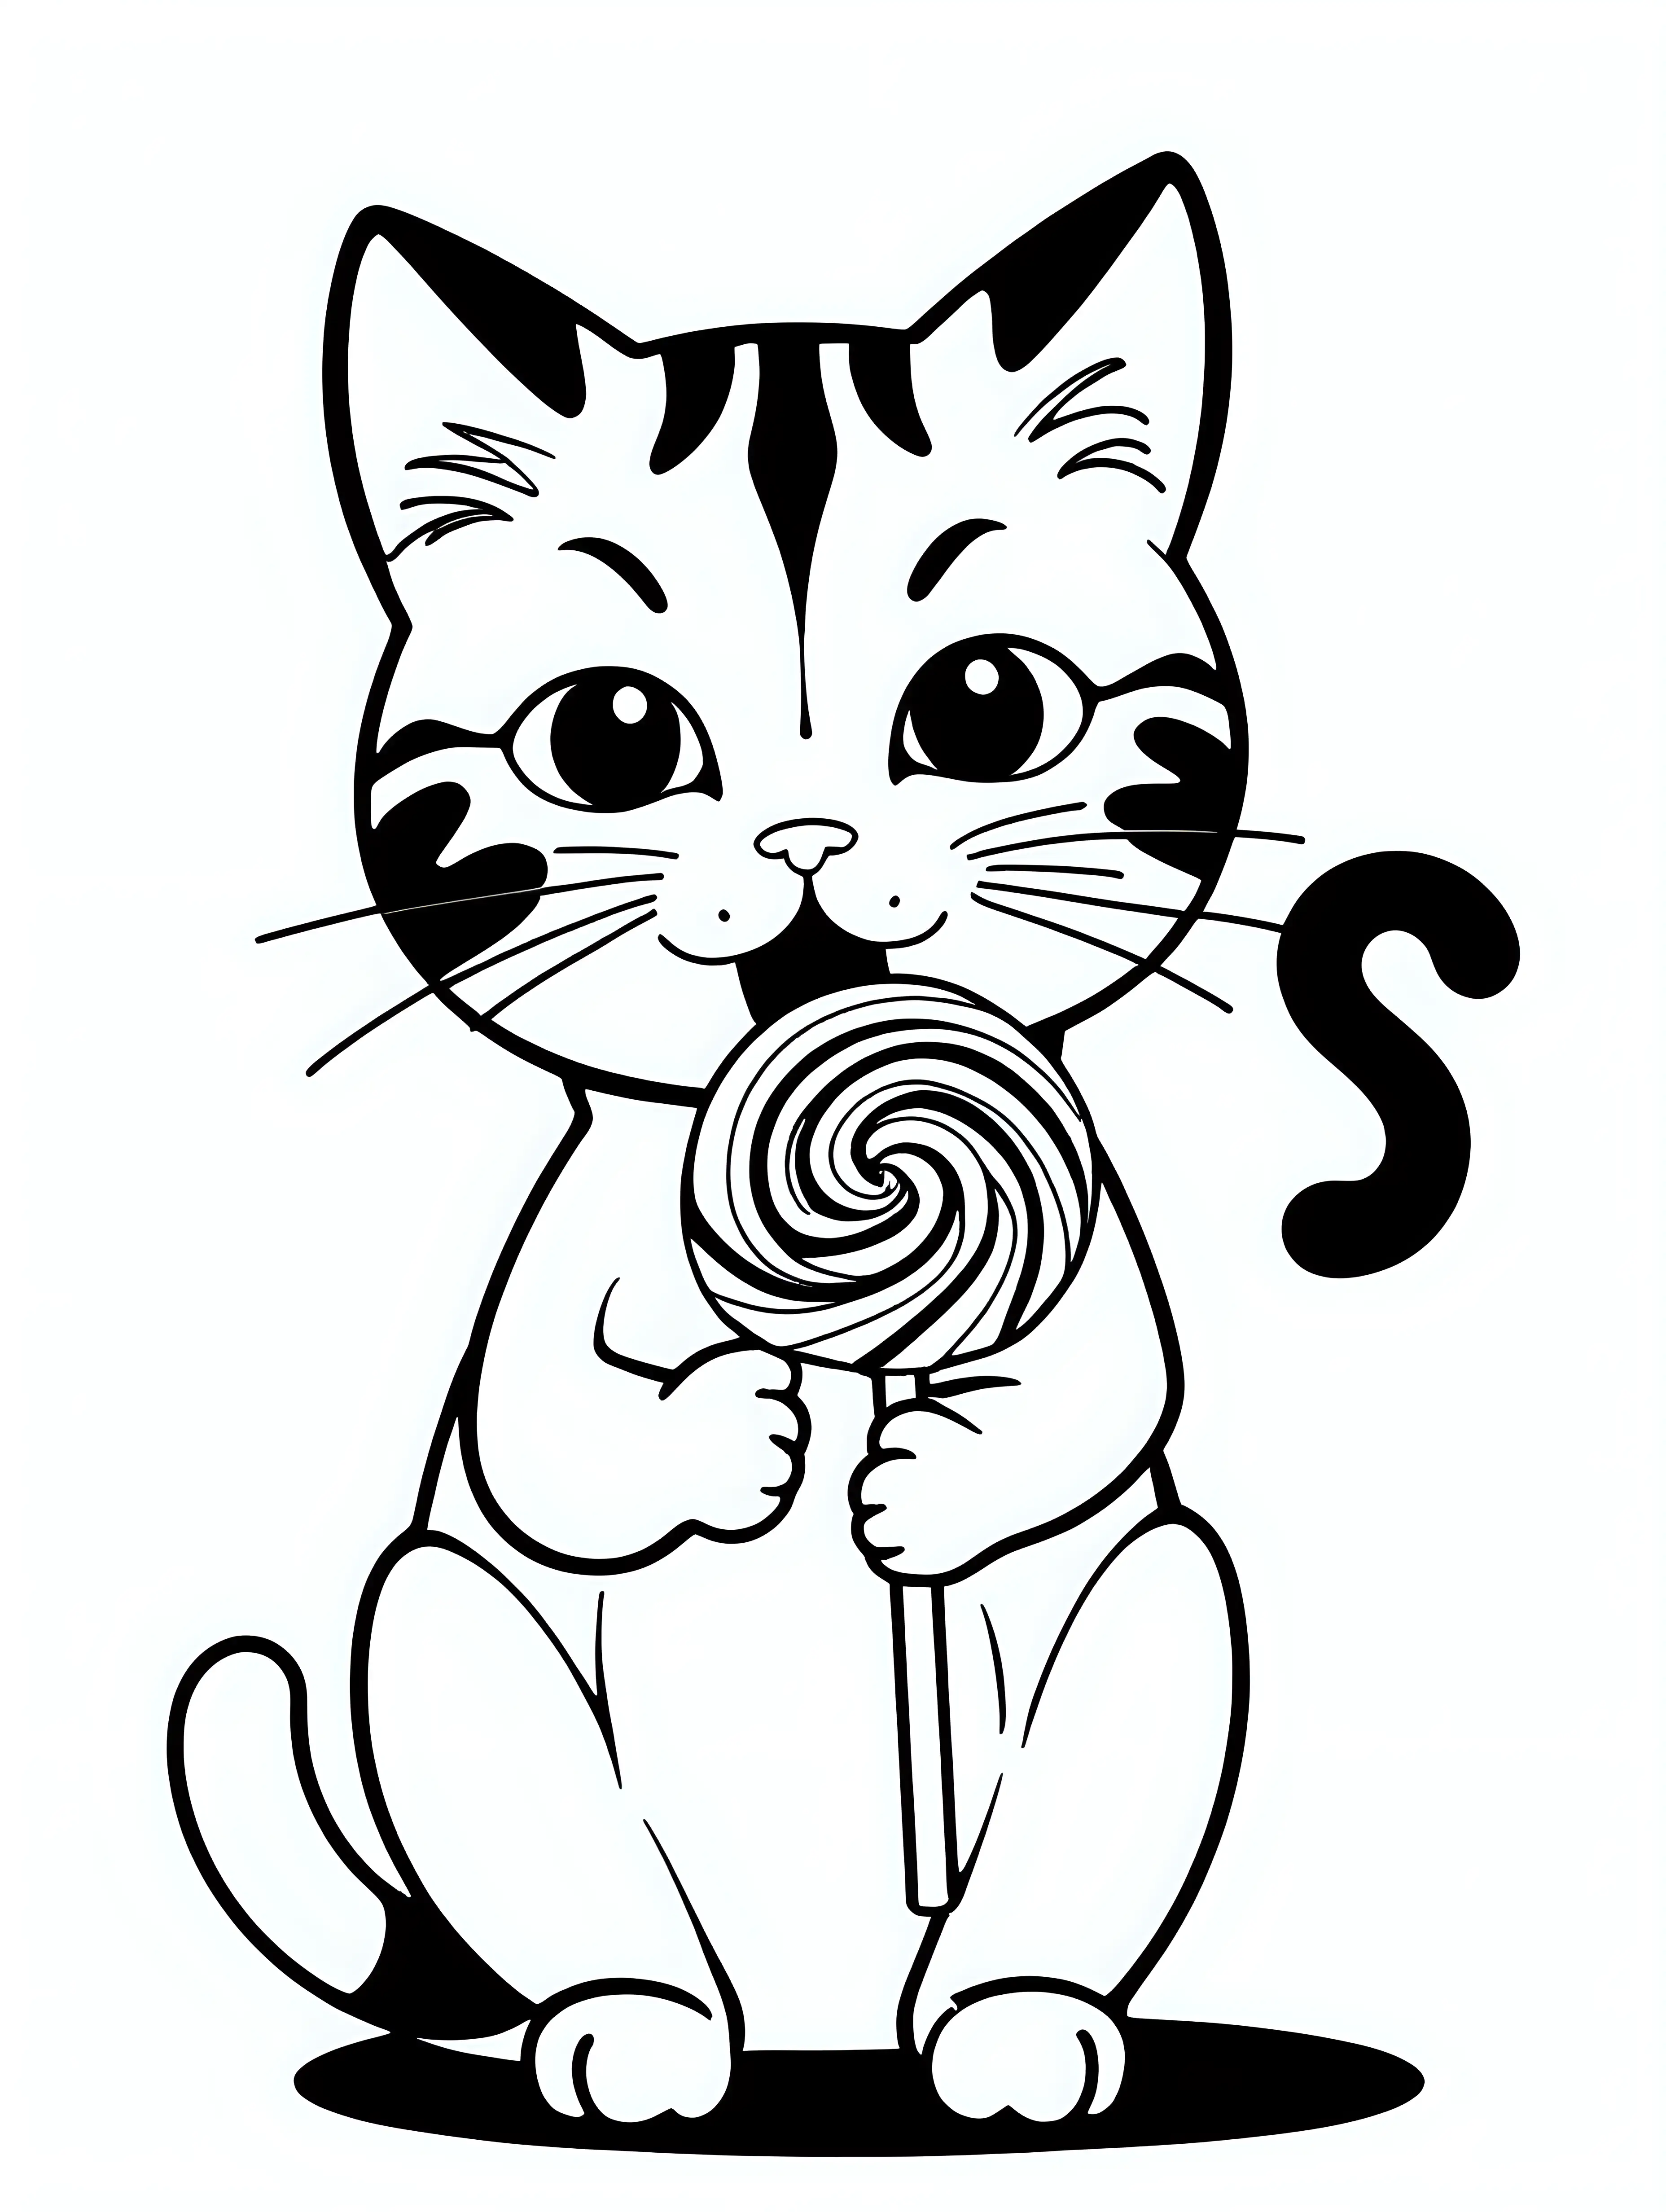 Black And white coloring image of a cute kawaii cat eating a candy lollipop, black lines white background black and white only